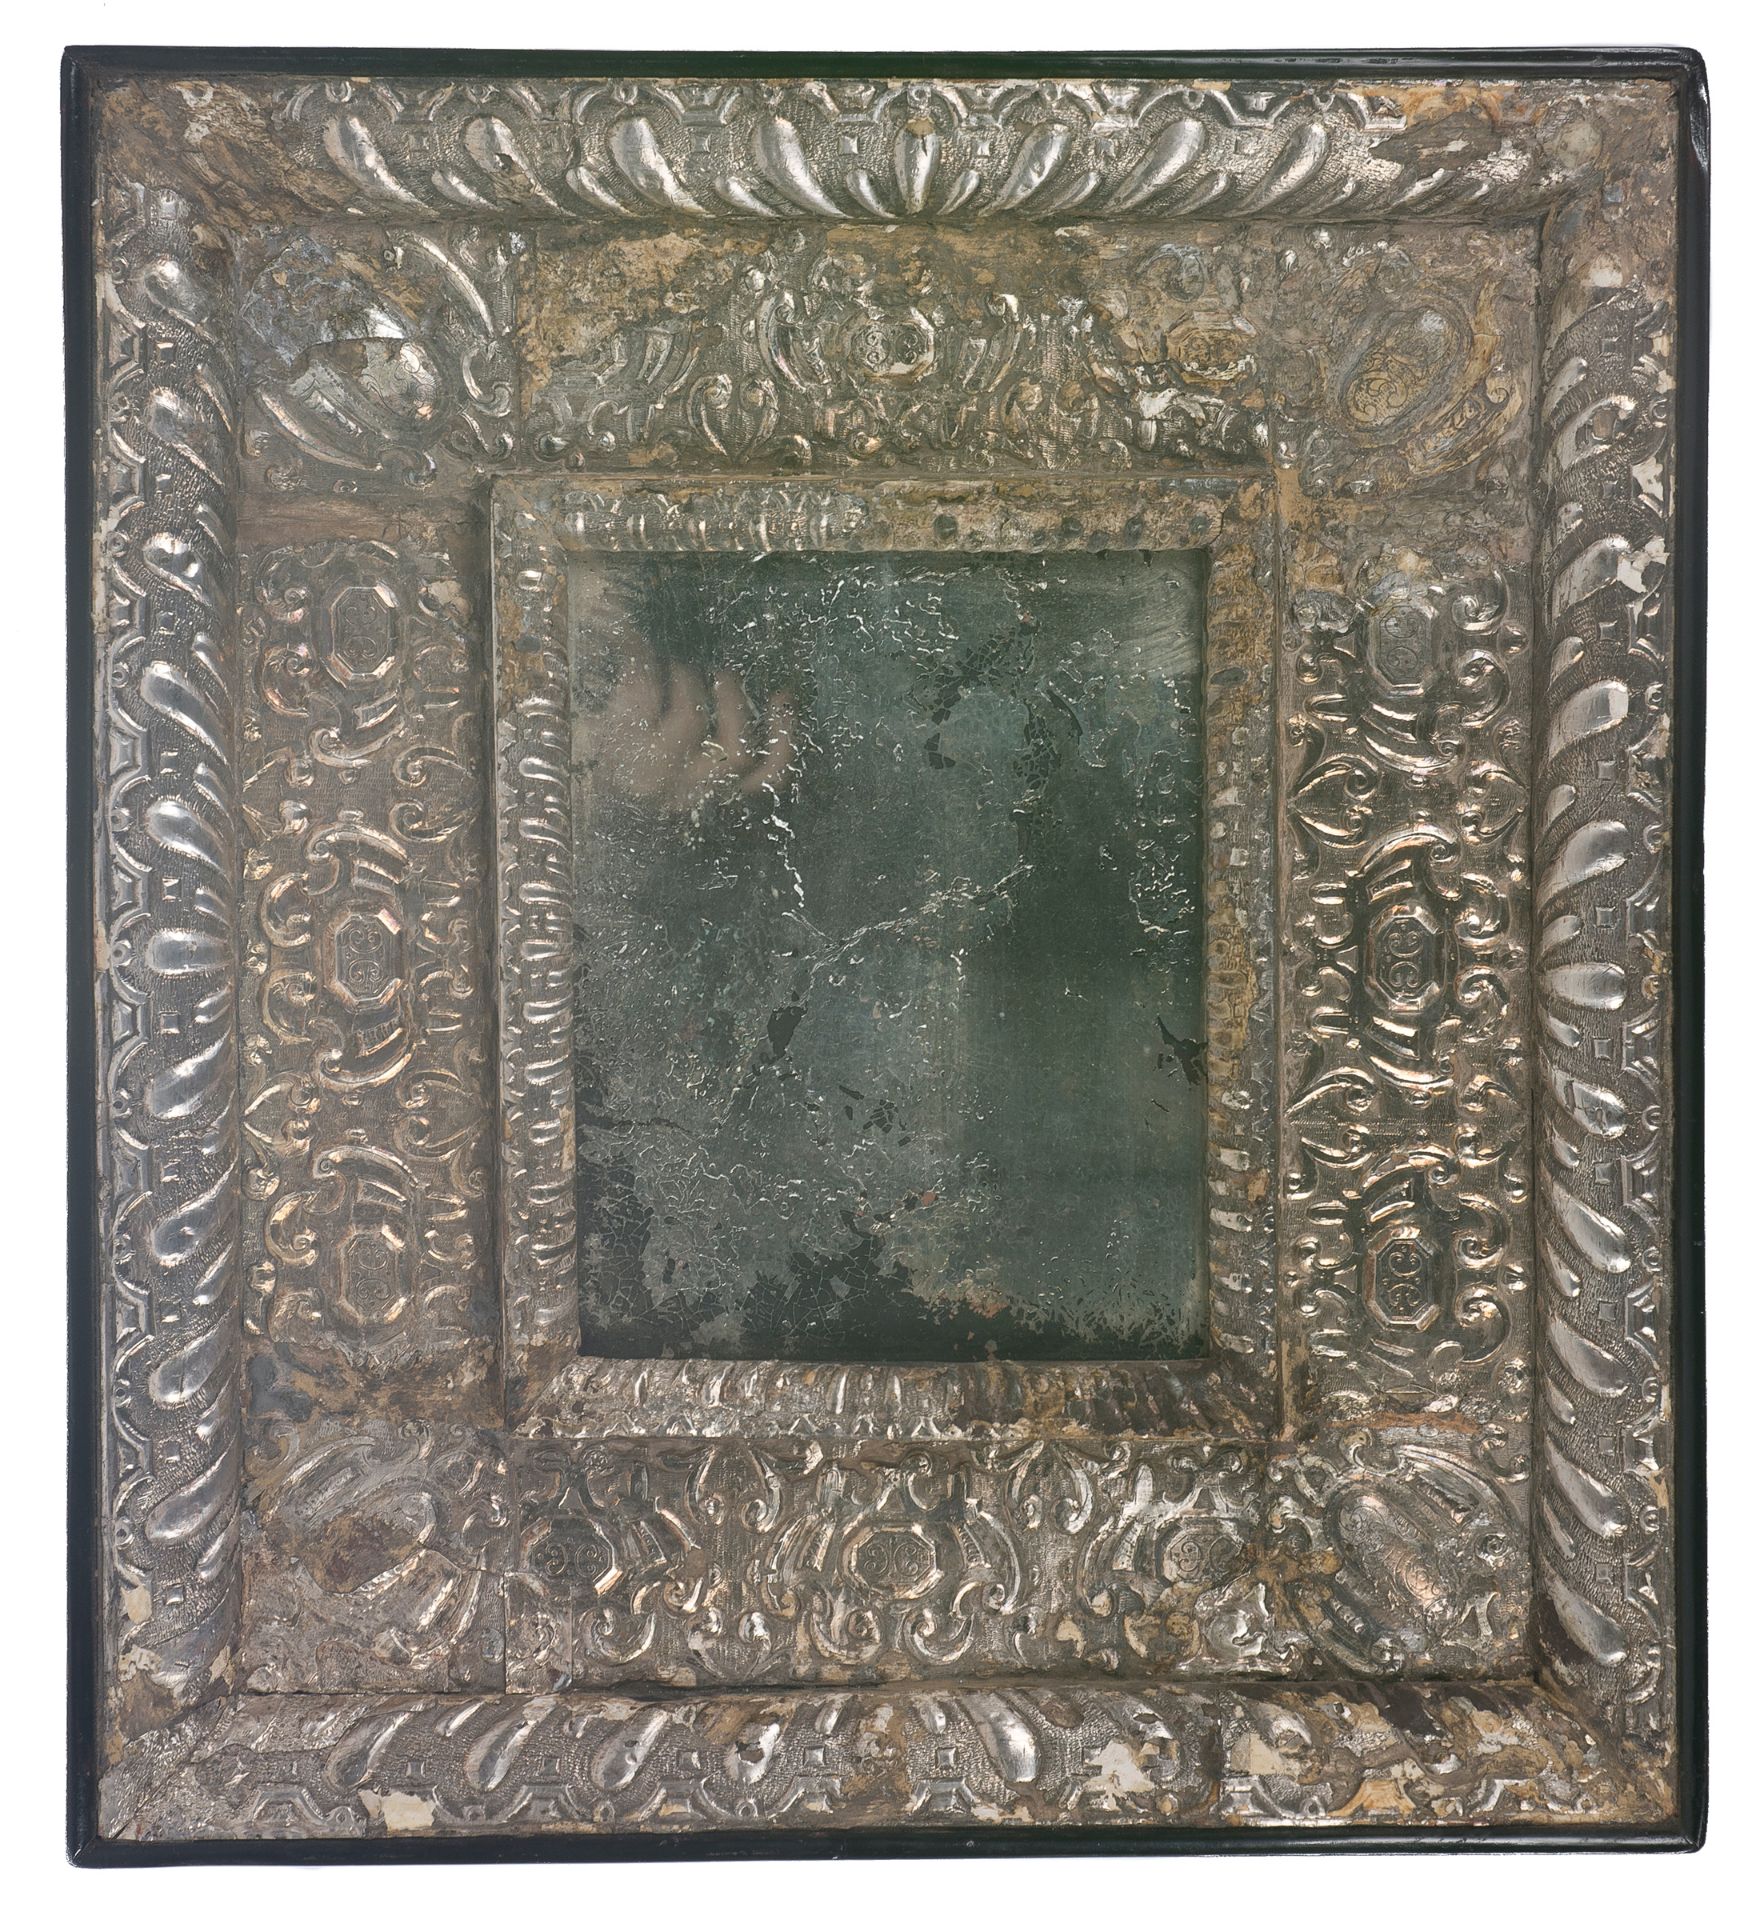 Mirror with wooden frame covered in embossed silver mirror. Colonial. Peru. Mid 17th century.